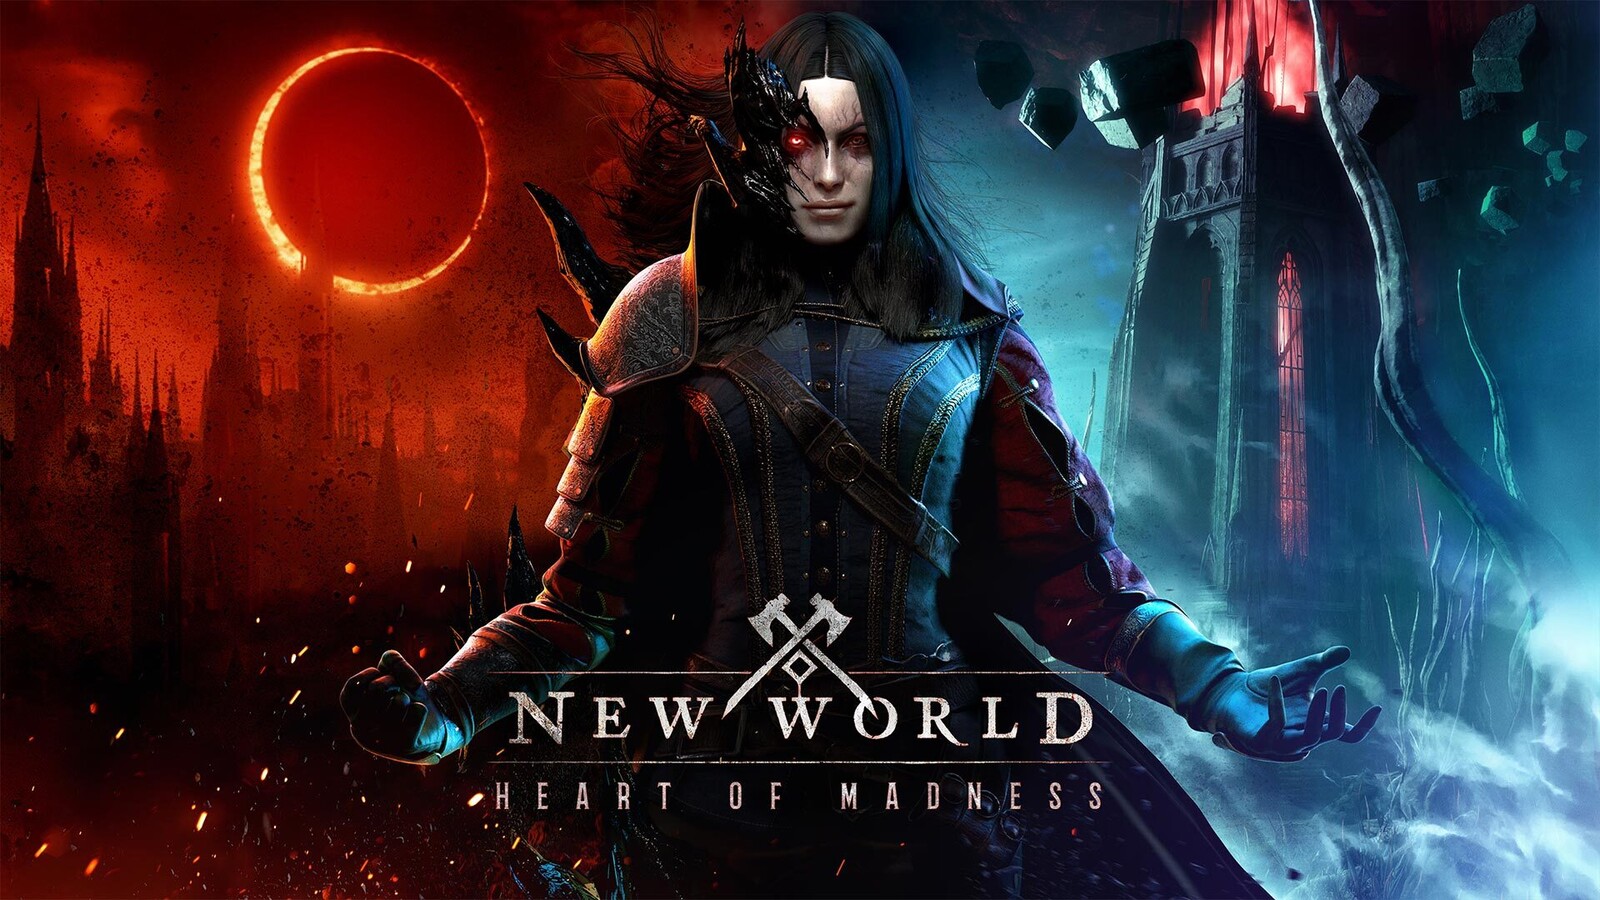 Heart of Madness images 1